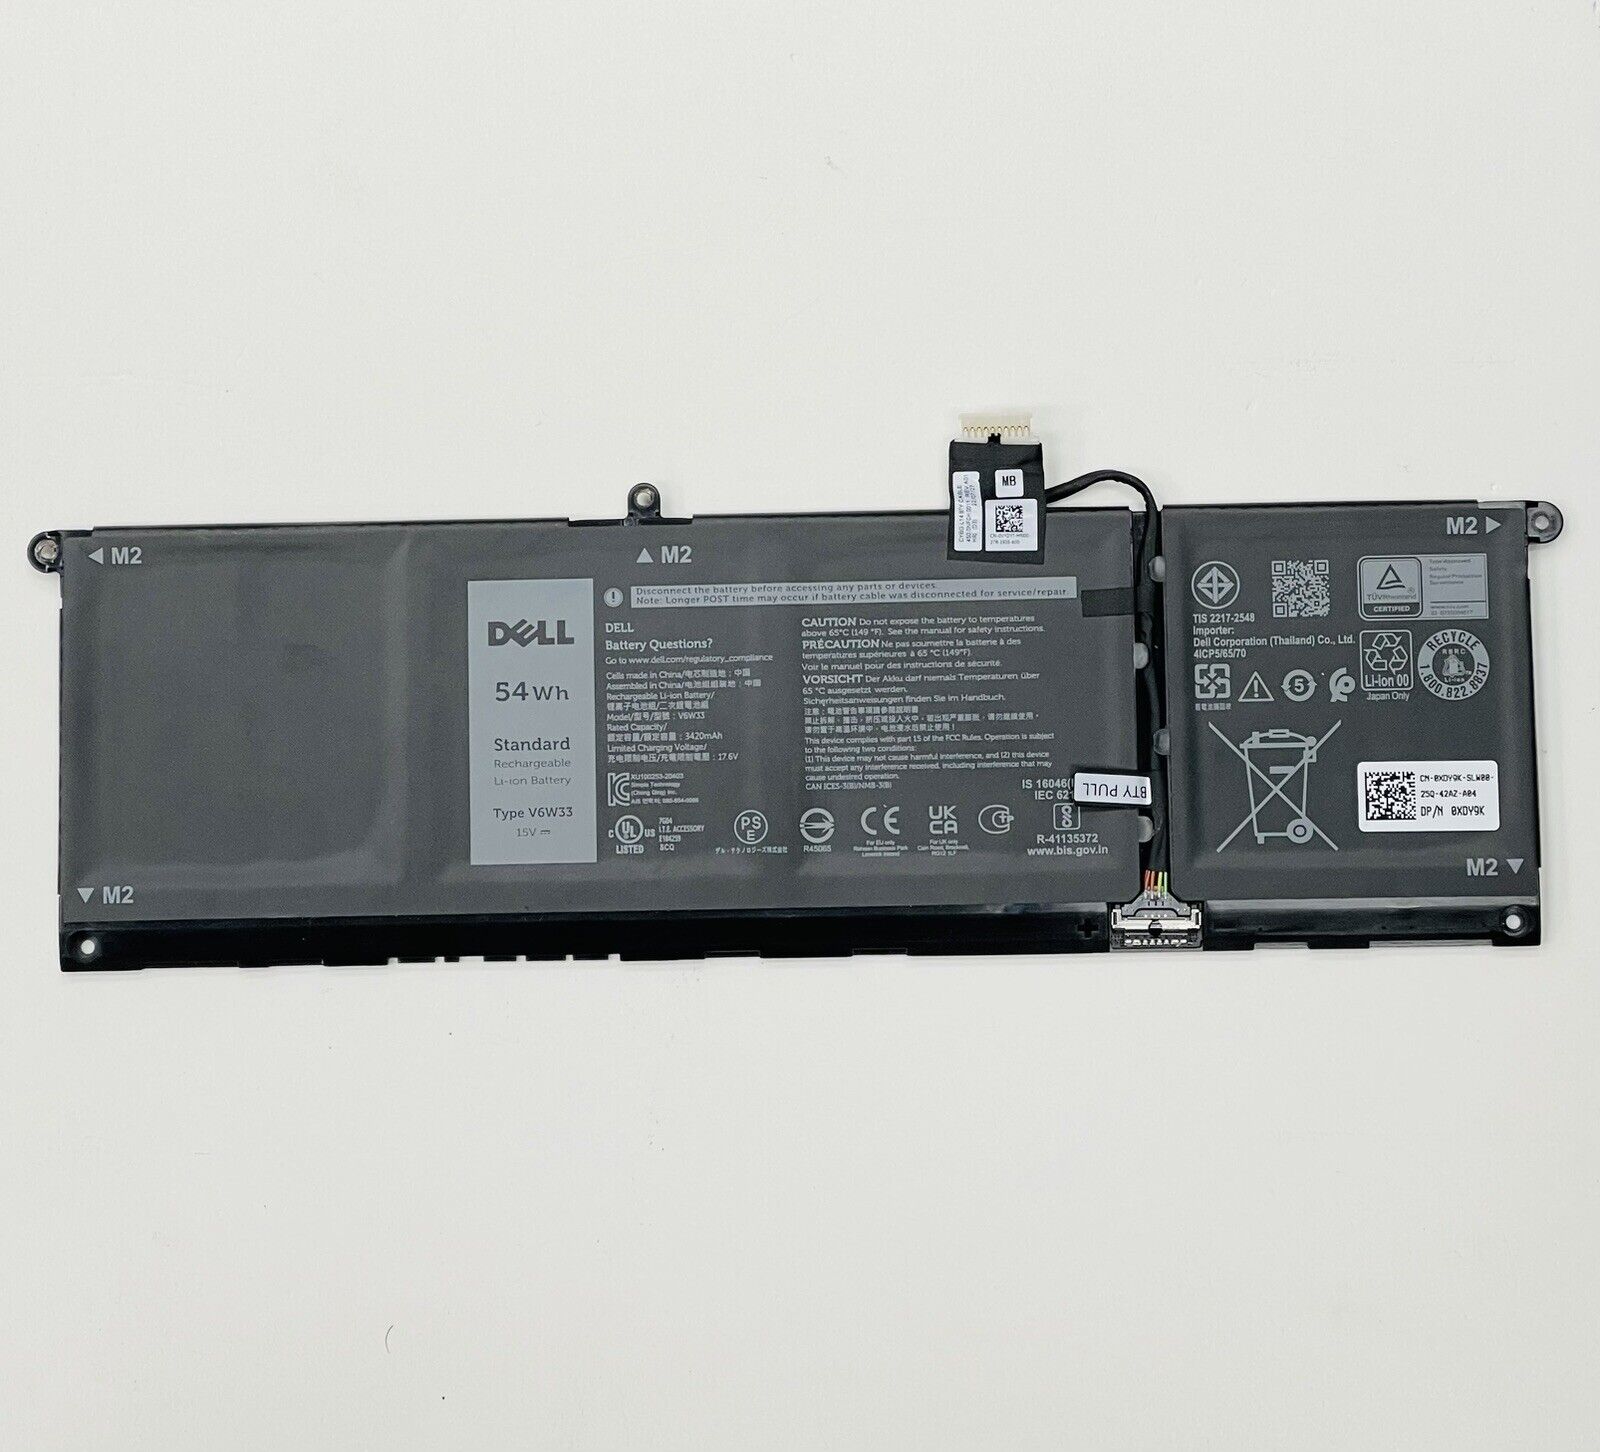 ORIGINAL PULLOUT Dell V6W33 3420mAh 4 Cell Laptop Battery for Inspiron 5310/5410